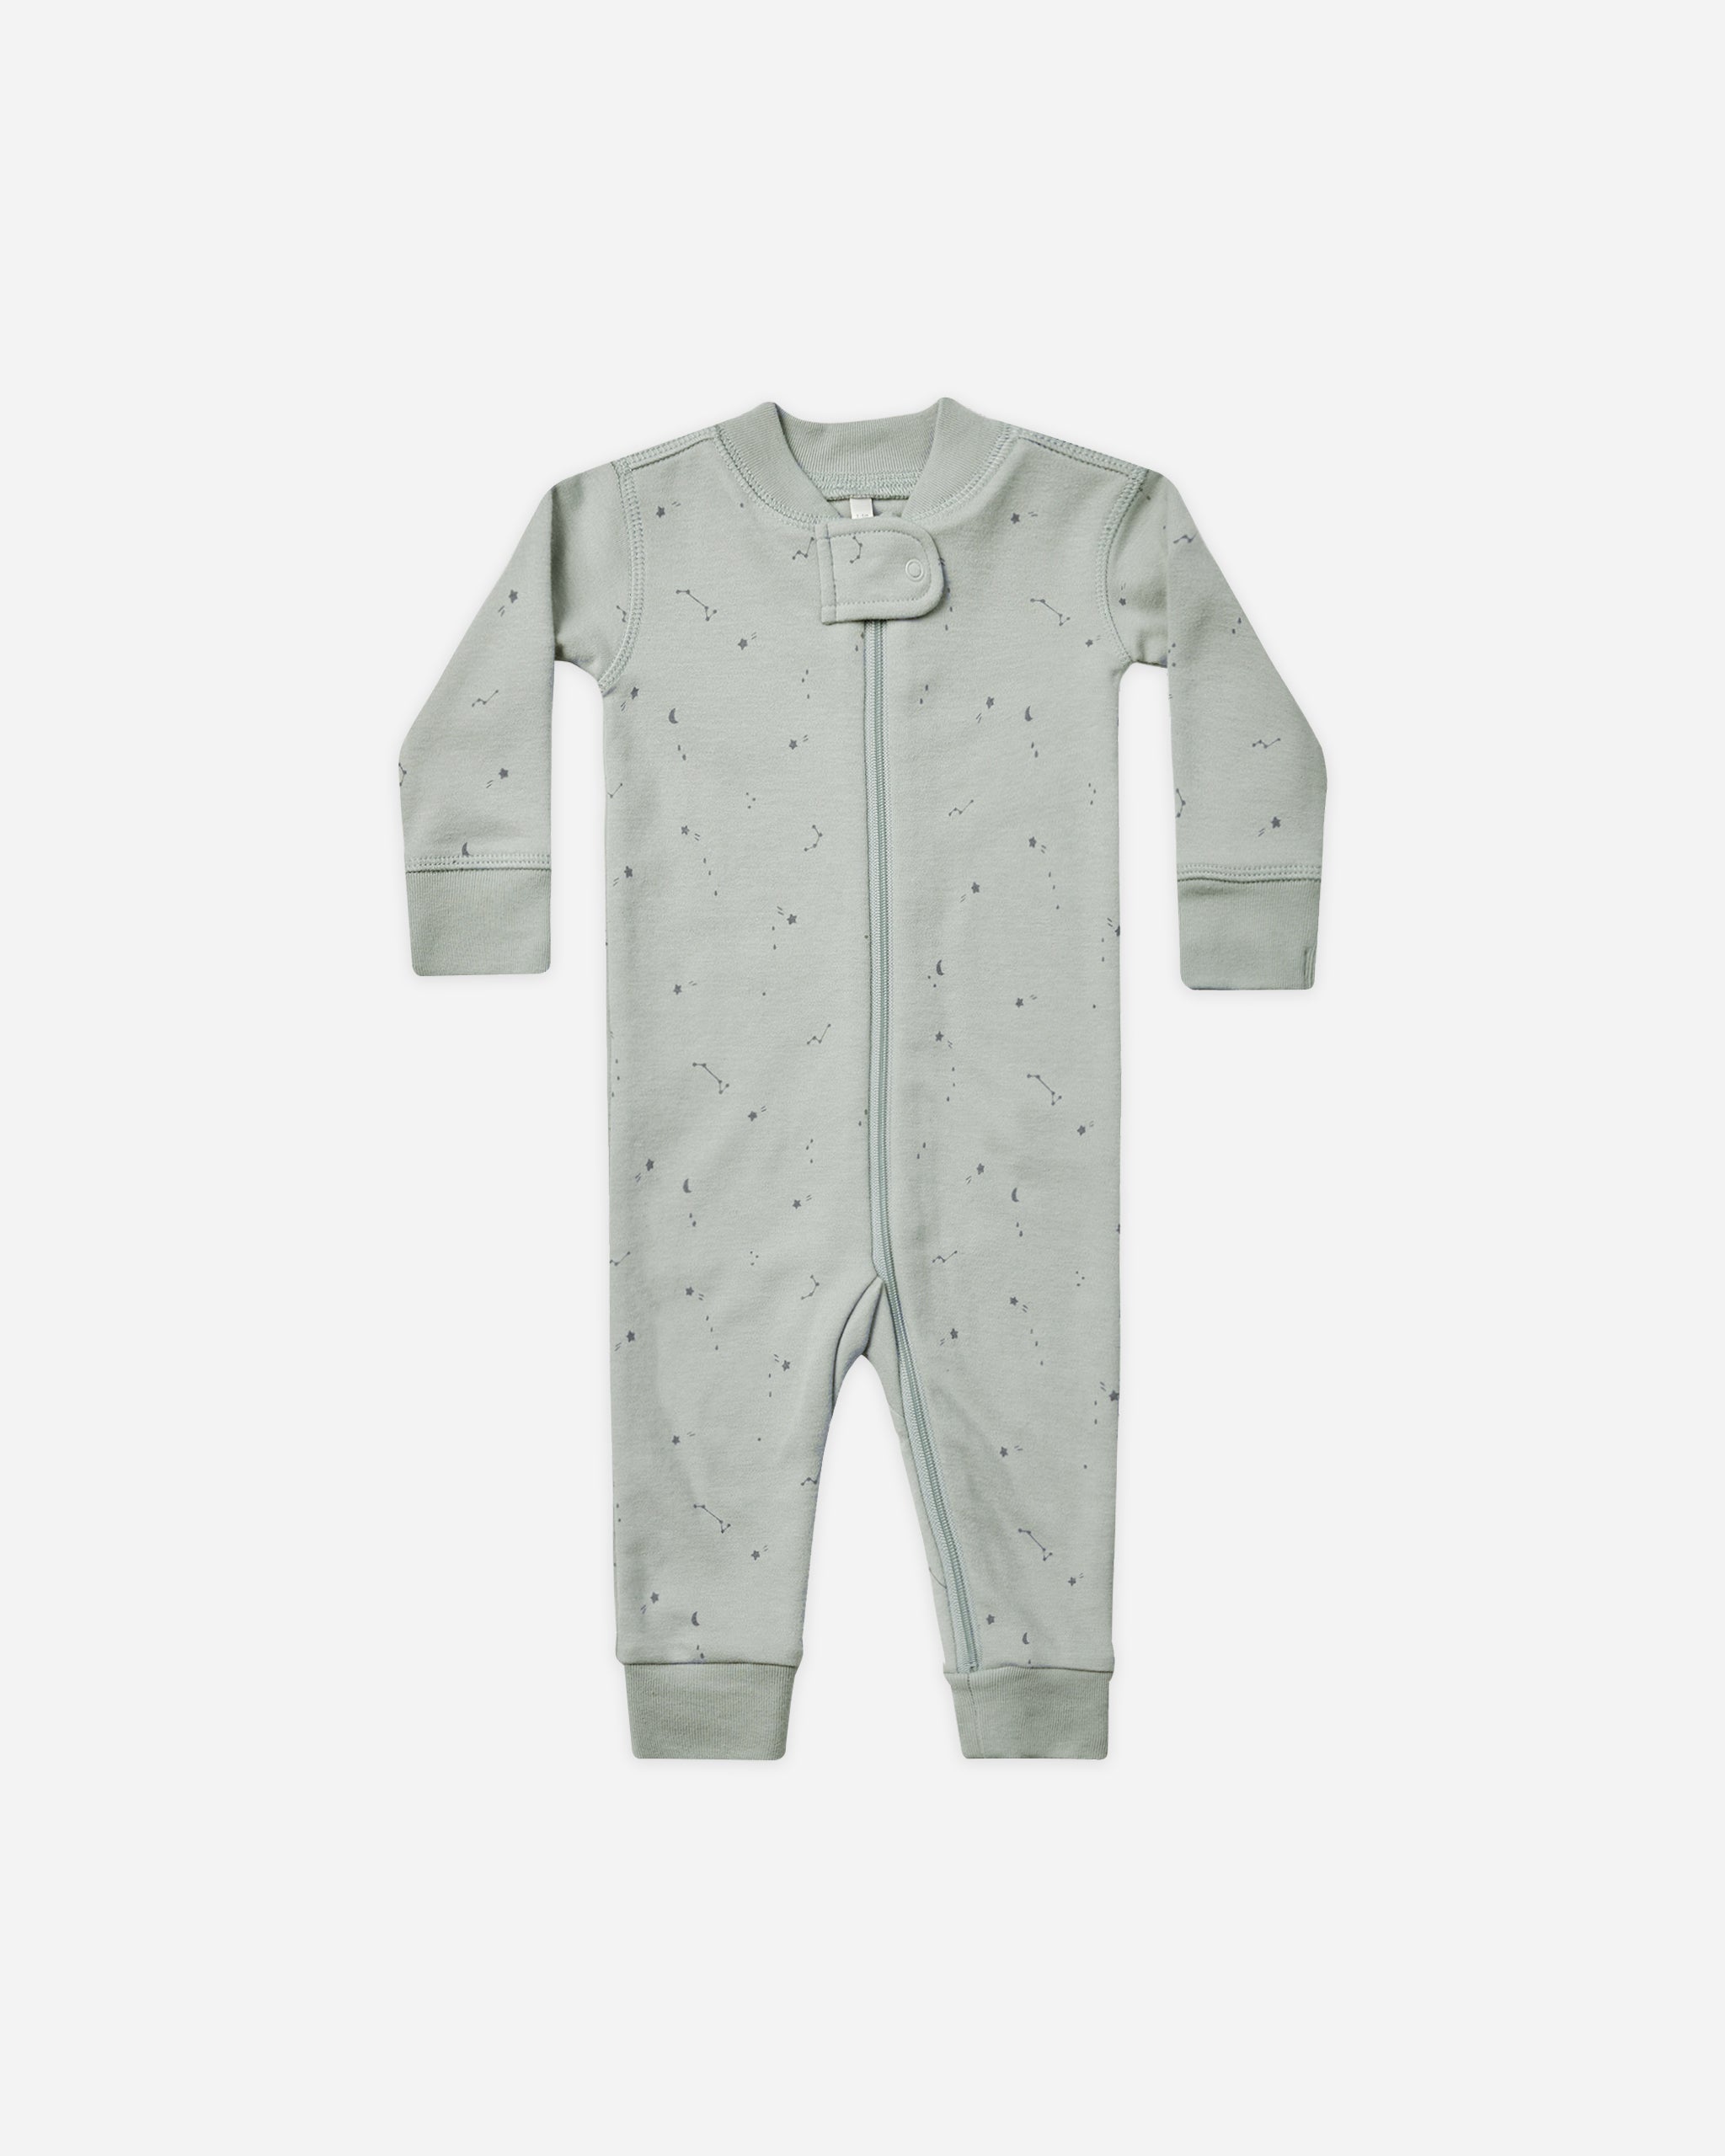 Zip Long Sleeve Sleeper || Constellations - Rylee + Cru | Kids Clothes | Trendy Baby Clothes | Modern Infant Outfits |